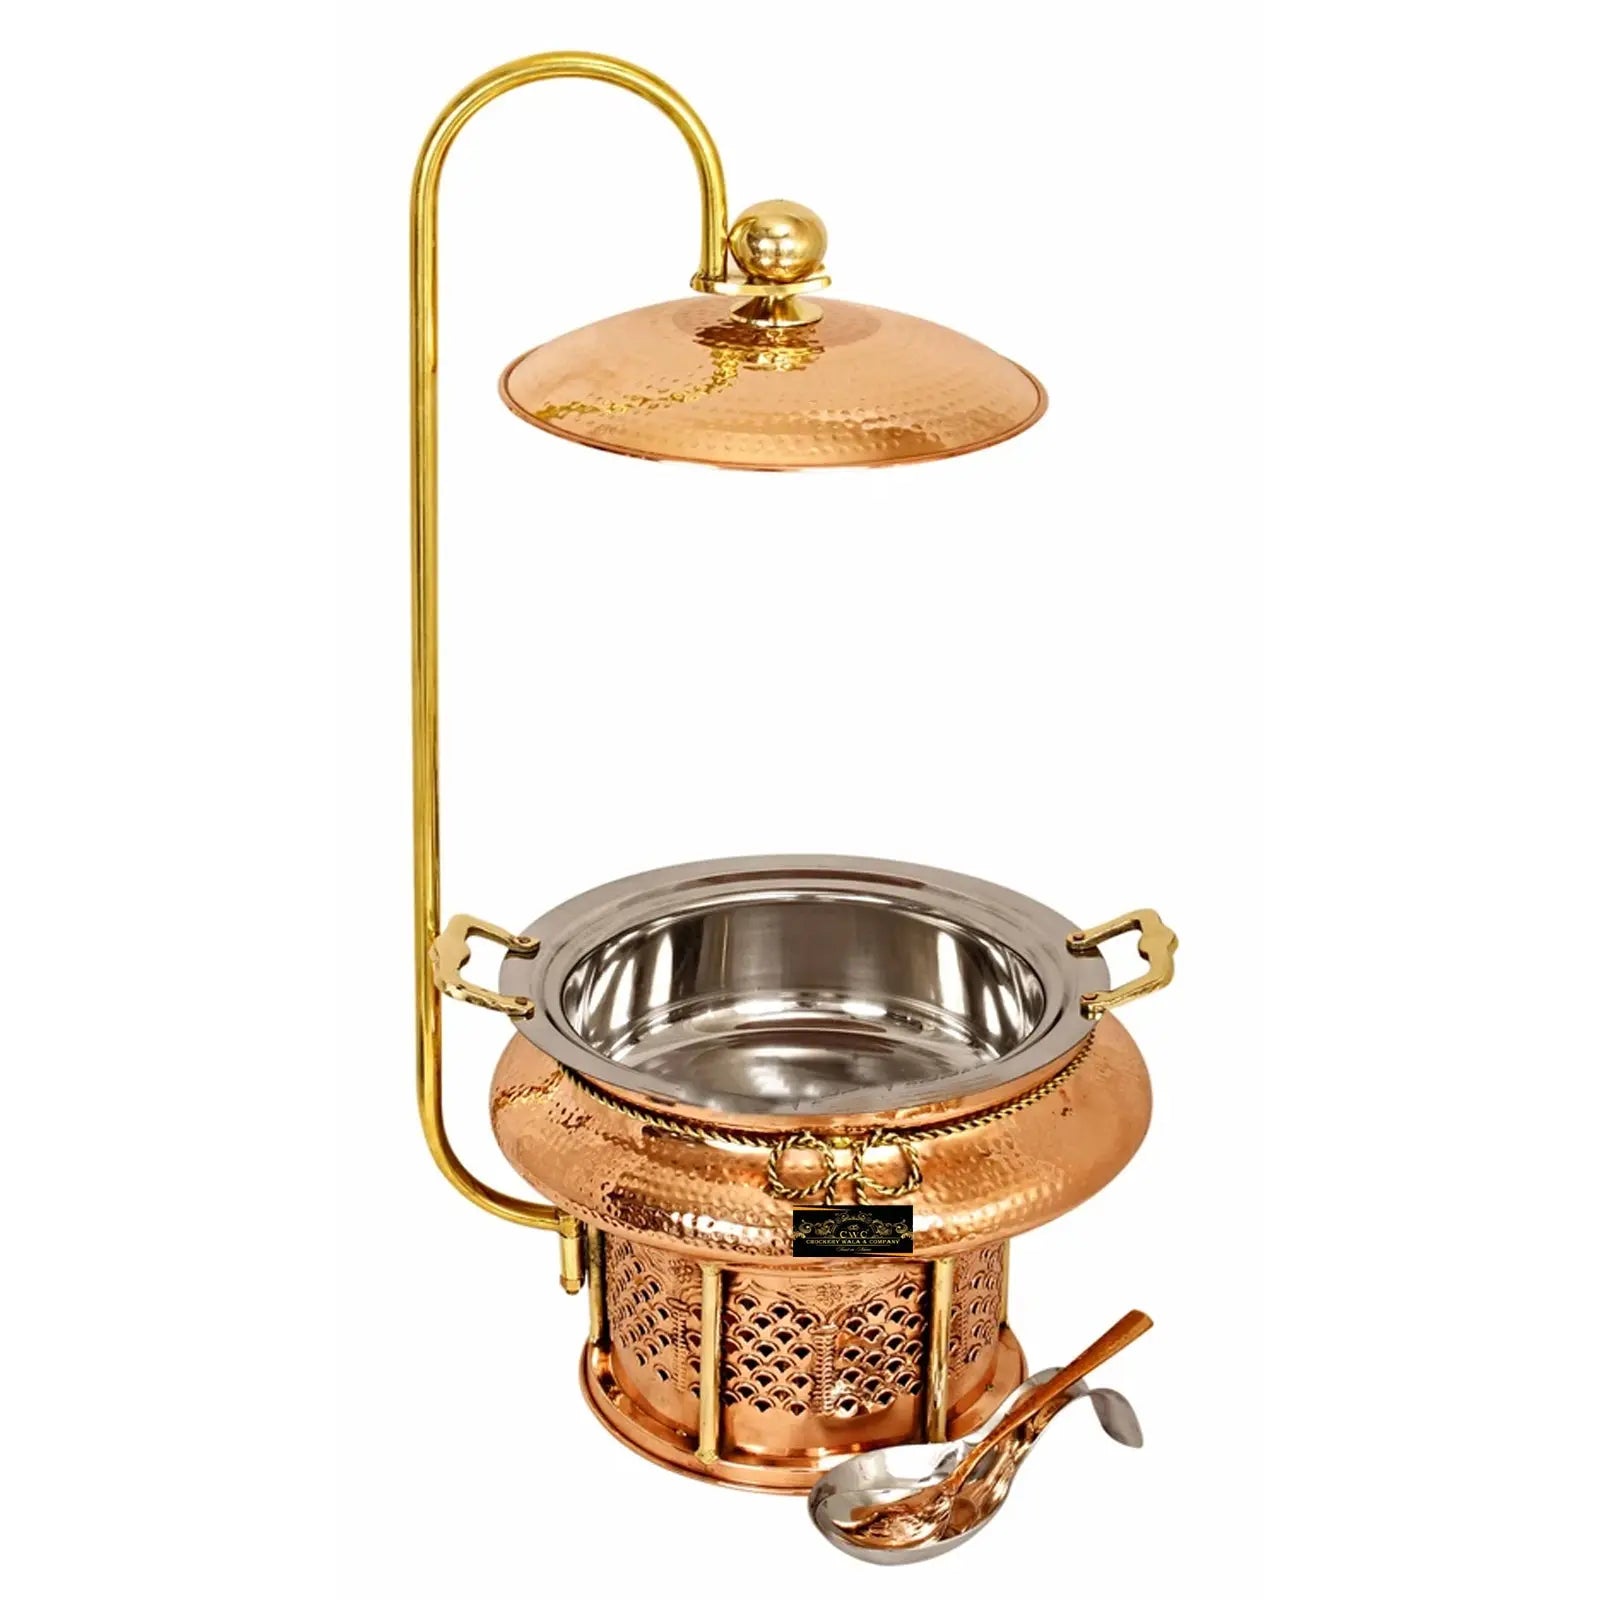 Crockery Wala And Company Copper Steel Chaffing Dish With Stand Hammered Copper Design 4 Liters - CROCKERY WALA AND COMPANY 